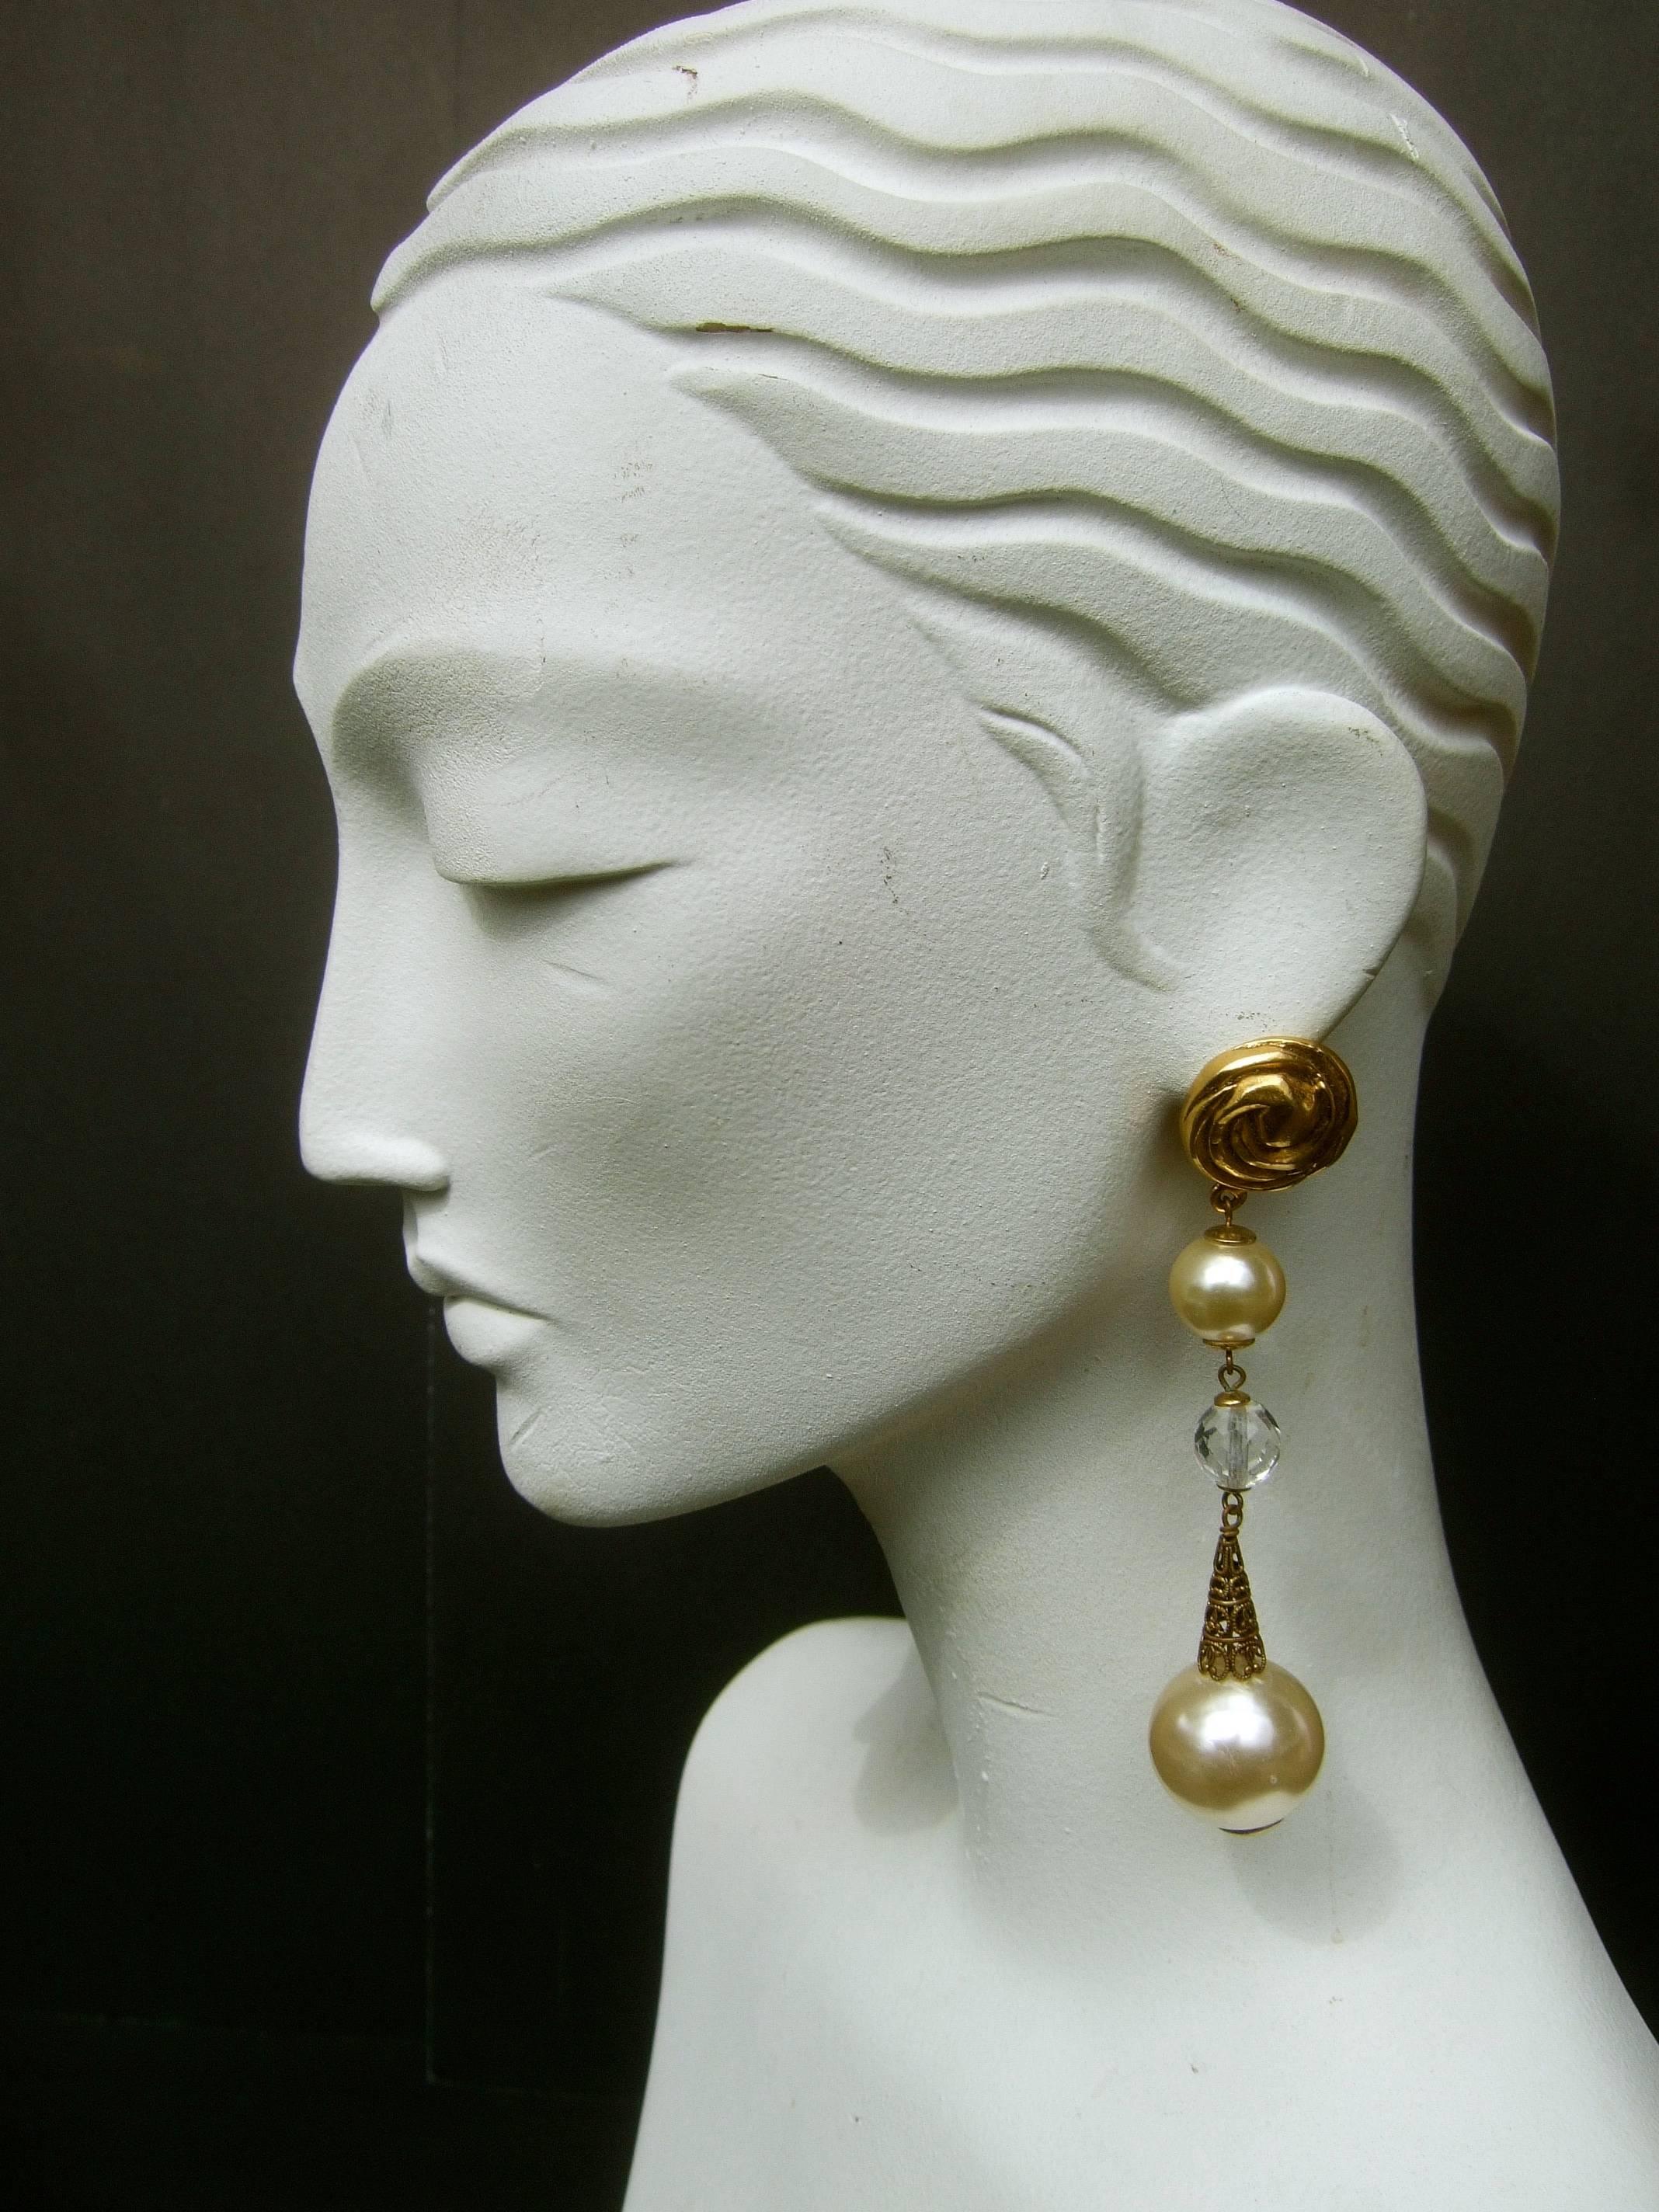 Opulent French resin pearl crystal statement earrings designed by Poggi Paris 
The long dramatic French earrings are designed with a large orb shaped 
resin enamel pearl dangling at the base

The gilt metal circular medallion clip at the top is